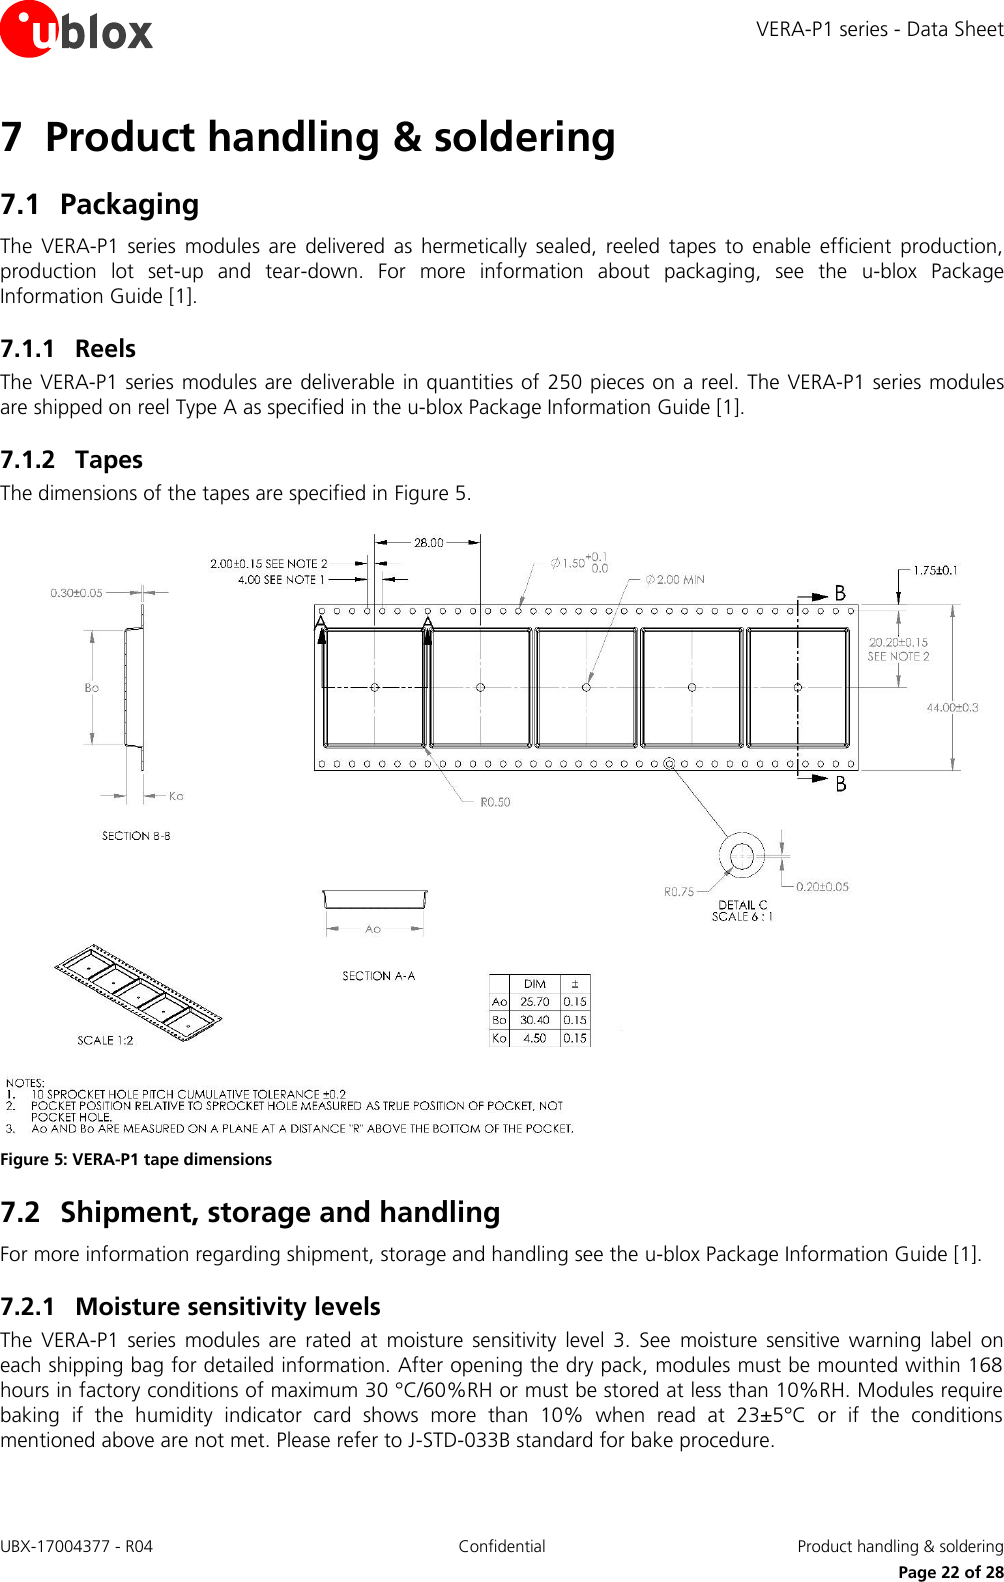 VERA-P1 series - Data Sheet UBX-17004377 - R04 Confidential  Product handling &amp; soldering     Page 22 of 28 7 Product handling &amp; soldering 7.1 Packaging The  VERA-P1  series  modules  are  delivered  as  hermetically  sealed,  reeled  tapes  to  enable  efficient  production, production  lot  set-up  and  tear-down.  For  more  information  about  packaging,  see  the  u-blox  Package Information Guide [1]. 7.1.1 Reels The VERA-P1 series modules are deliverable in quantities of  250 pieces on a reel.  The VERA-P1 series modules are shipped on reel Type A as specified in the u-blox Package Information Guide [1].  7.1.2 Tapes The dimensions of the tapes are specified in Figure 5.  Figure 5: VERA-P1 tape dimensions 7.2 Shipment, storage and handling  For more information regarding shipment, storage and handling see the u-blox Package Information Guide [1]. 7.2.1 Moisture sensitivity levels  The  VERA-P1  series  modules  are  rated  at  moisture  sensitivity  level  3.  See  moisture  sensitive  warning  label  on each shipping bag for detailed information. After opening the dry pack, modules must be mounted within 168 hours in factory conditions of maximum 30 °C/60%RH or must be stored at less than 10%RH. Modules require baking  if  the  humidity  indicator  card  shows  more  than  10%  when  read  at  23±5°C  or  if  the  conditions mentioned above are not met. Please refer to J-STD-033B standard for bake procedure. 